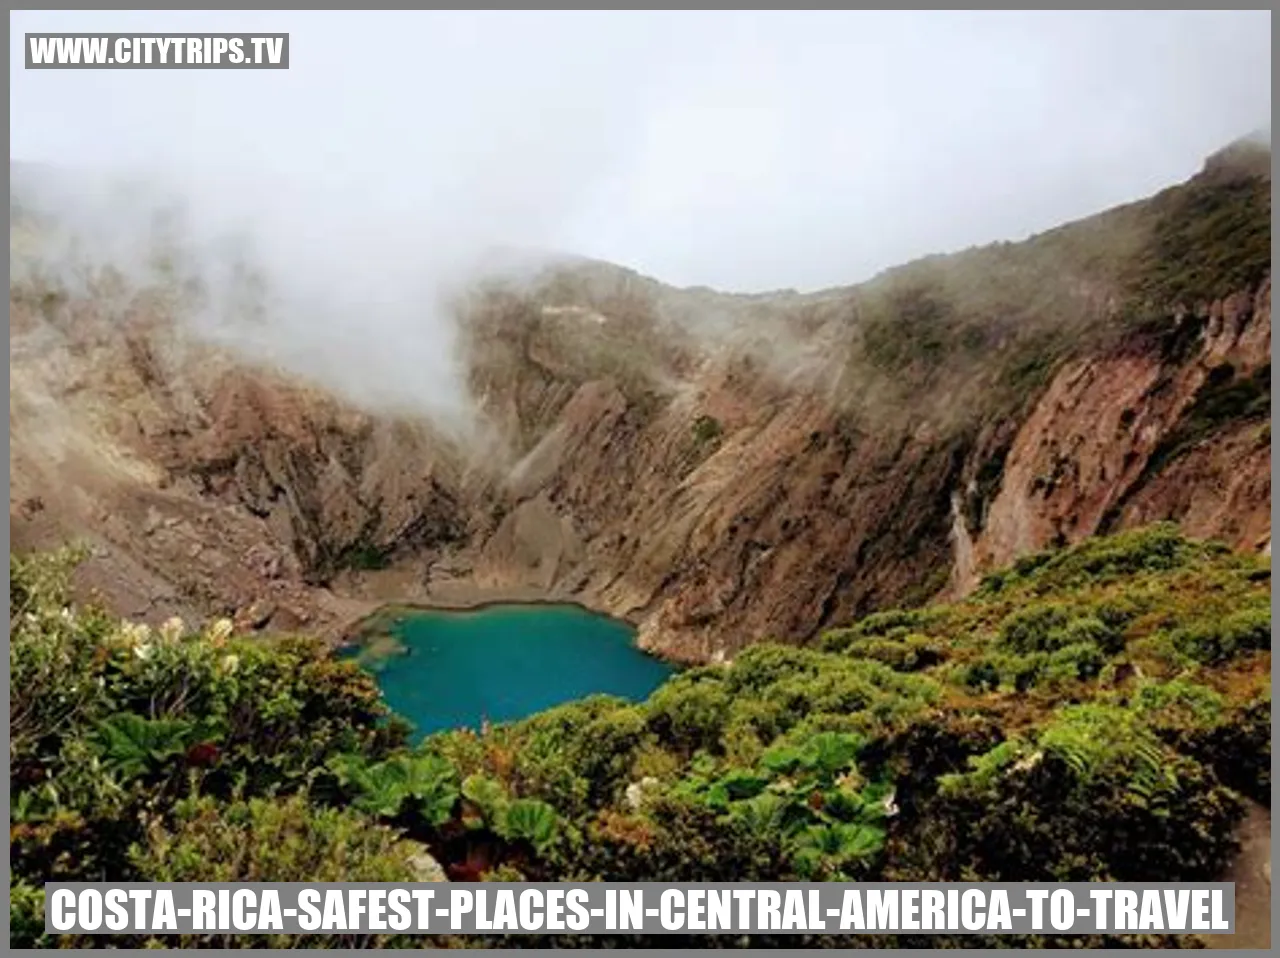 Costa Rica: Safest Places in Central America to Travel